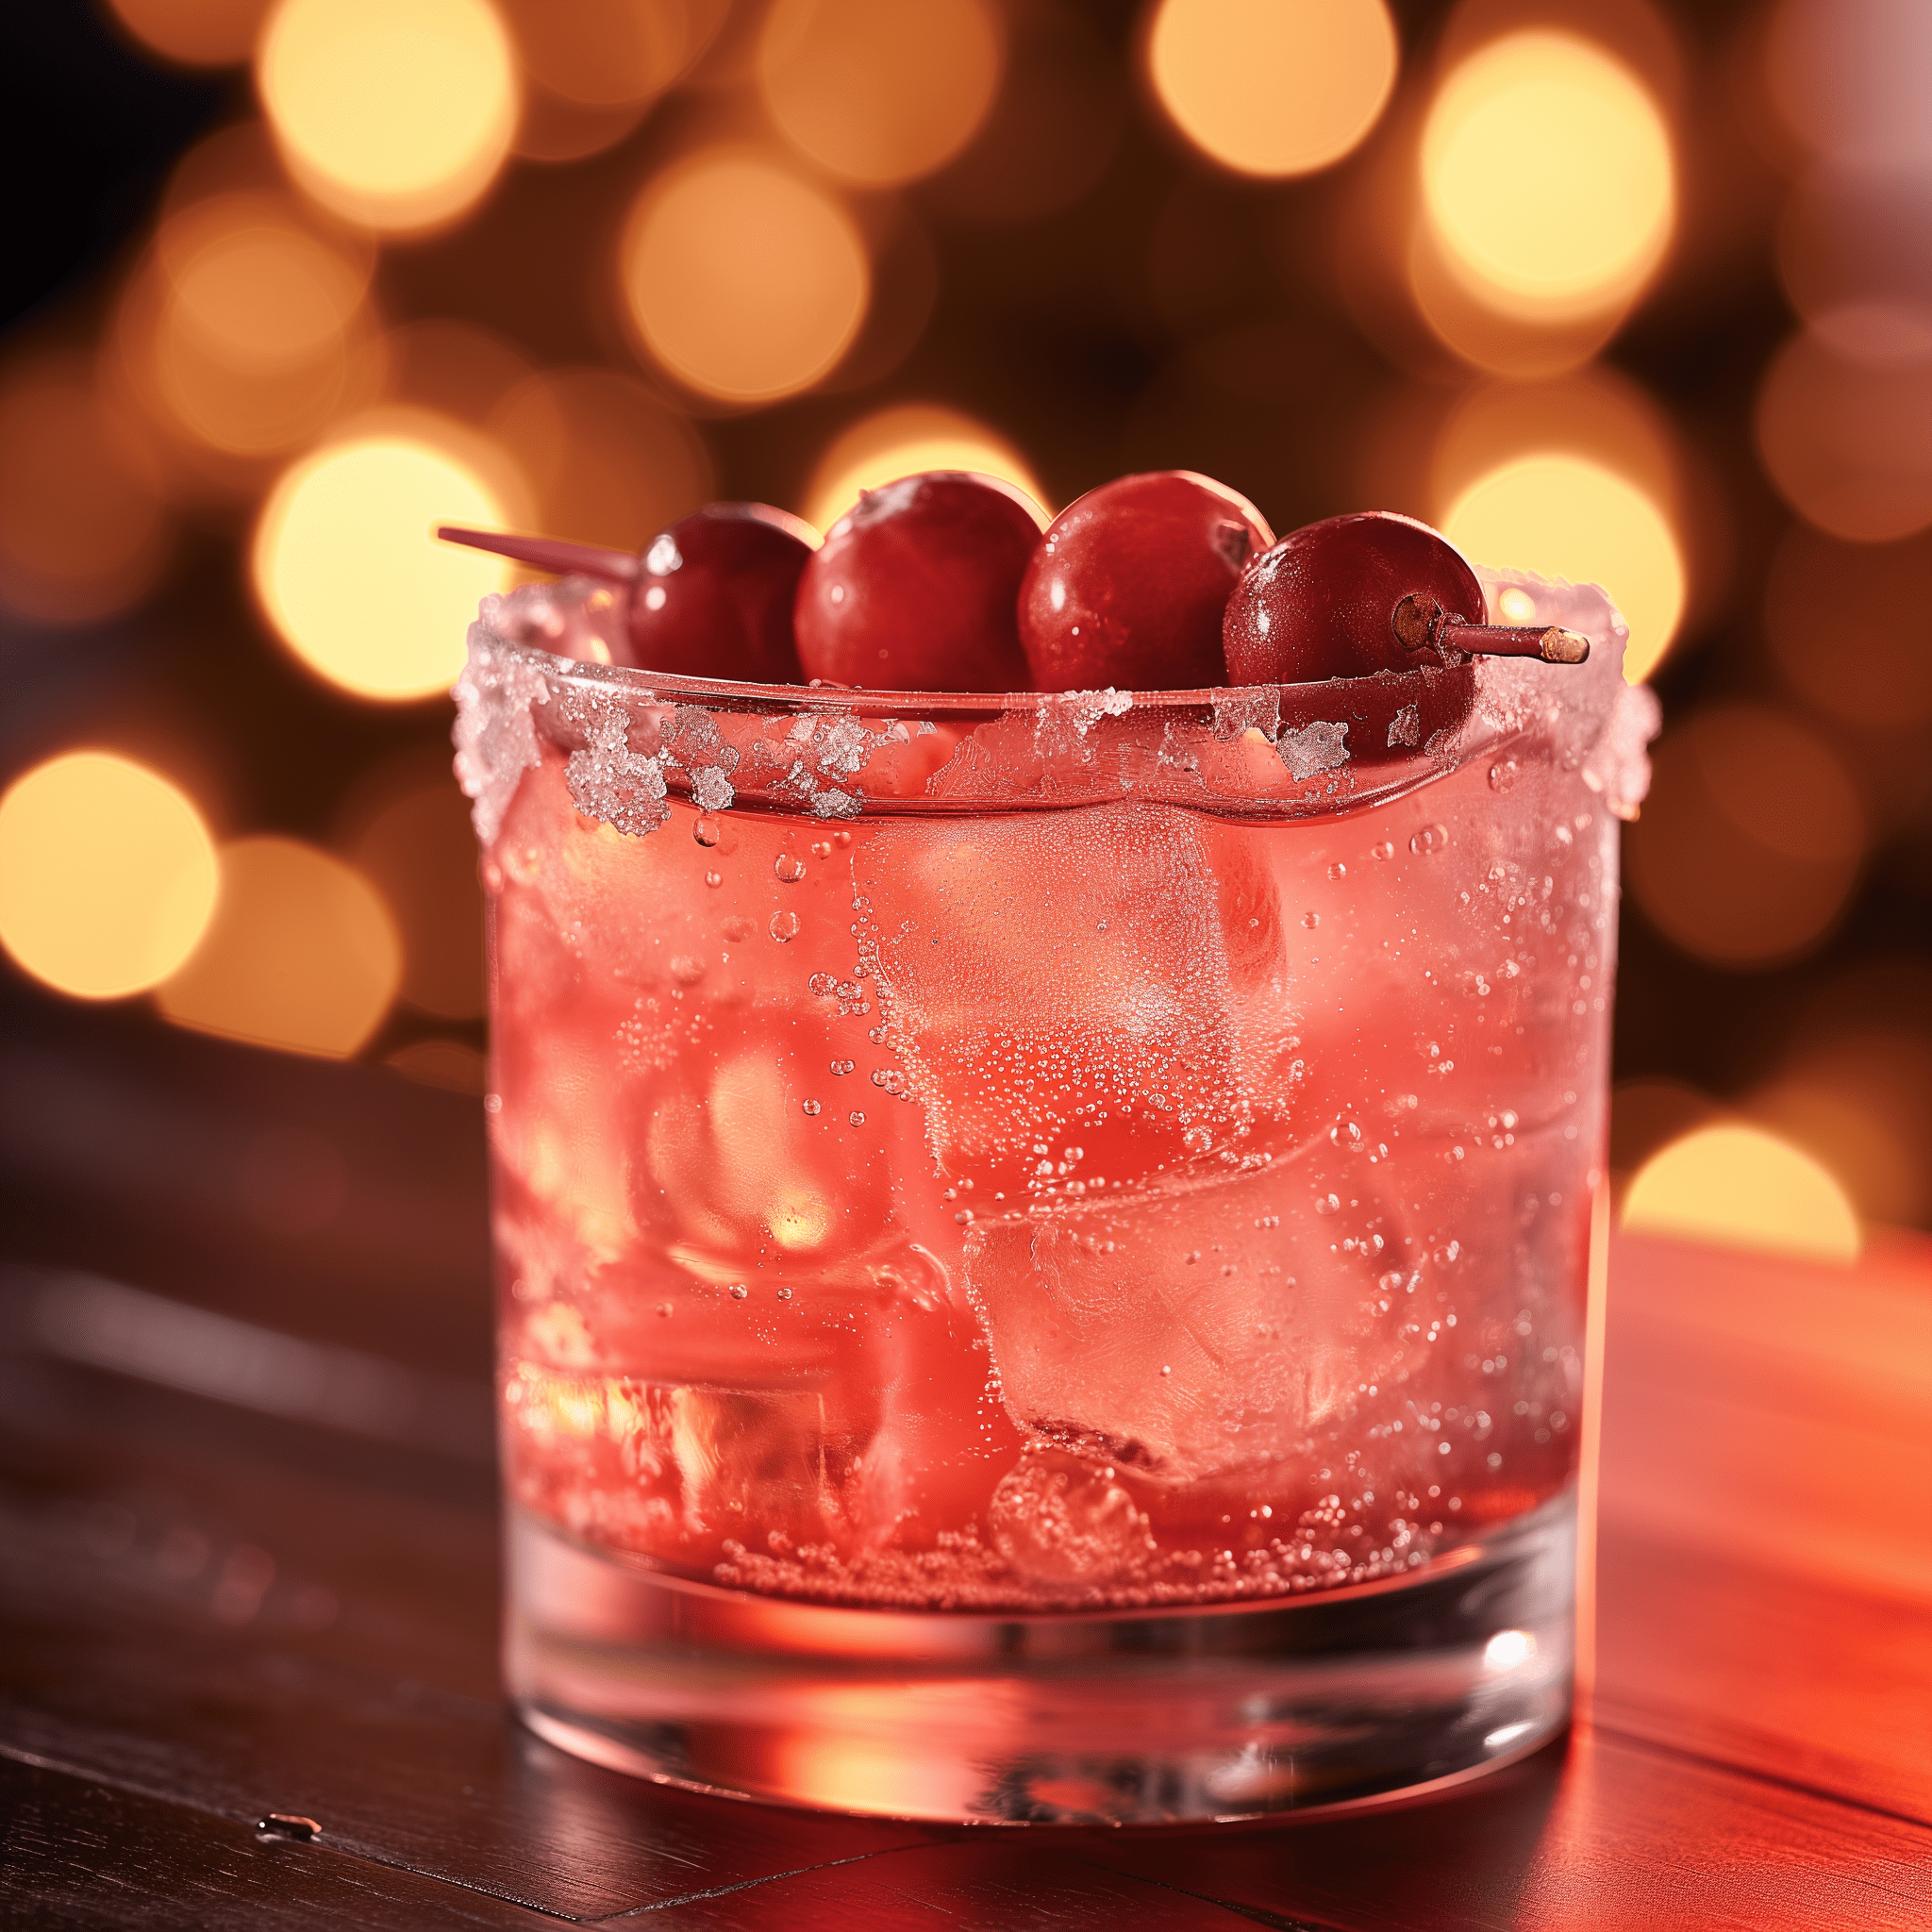 Sweetheart Cocktail Recipe - The Sweetheart cocktail offers a delightful mix of sweet and tart flavors, with the cranberry and lemon providing a zesty punch. The Aperol adds a slightly bitter and herbal undertone, while the limoncello and vodka give it a strong, yet smooth kick.